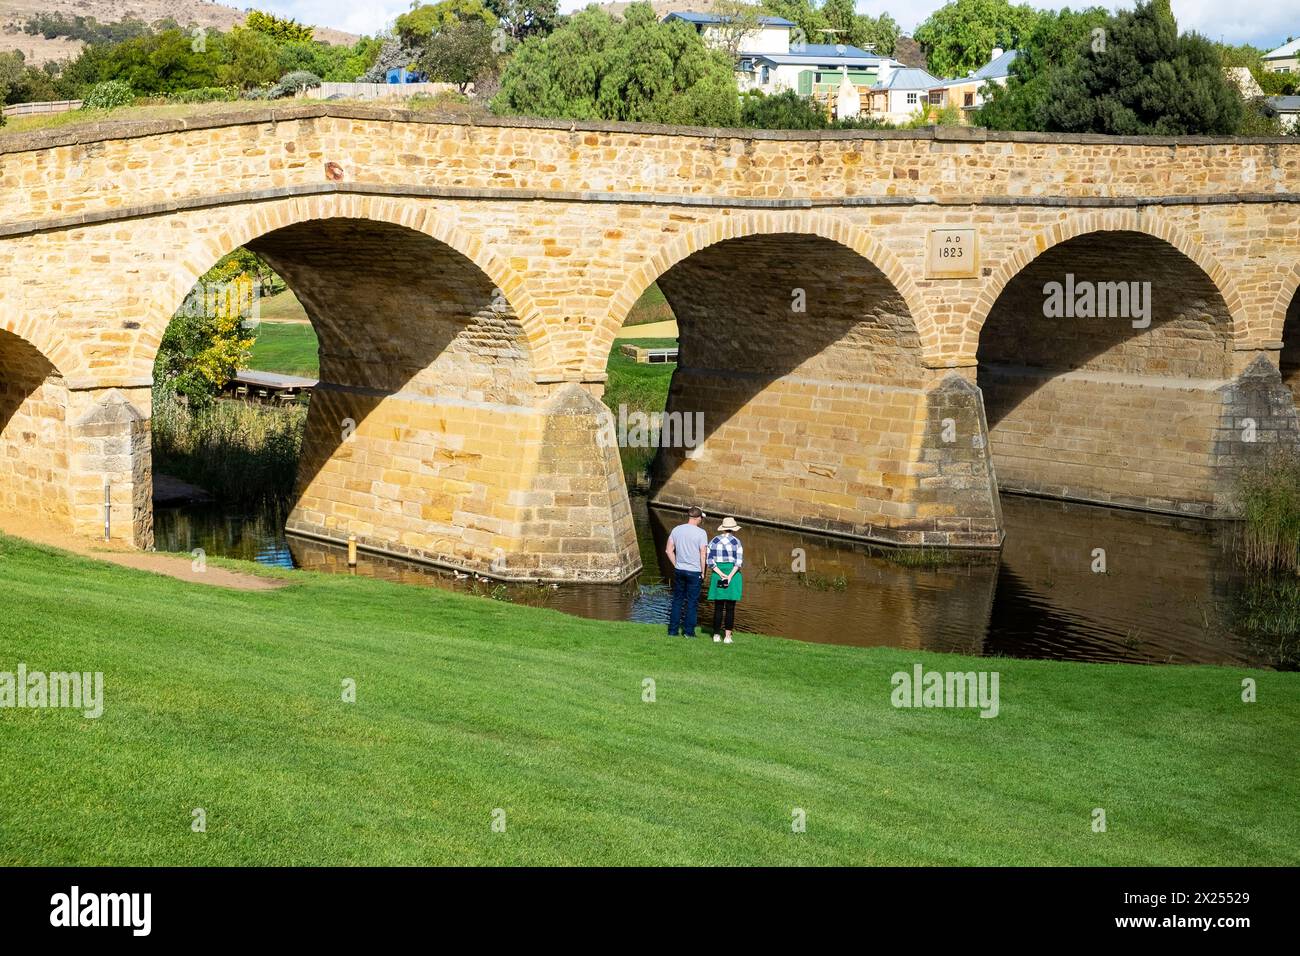 The Richmond Bridge is the oldest heritage-listed, convict-built, bridge located on the B31 in Richmond, 25 kilometres north of Hobart in Tasmania. Stock Photo